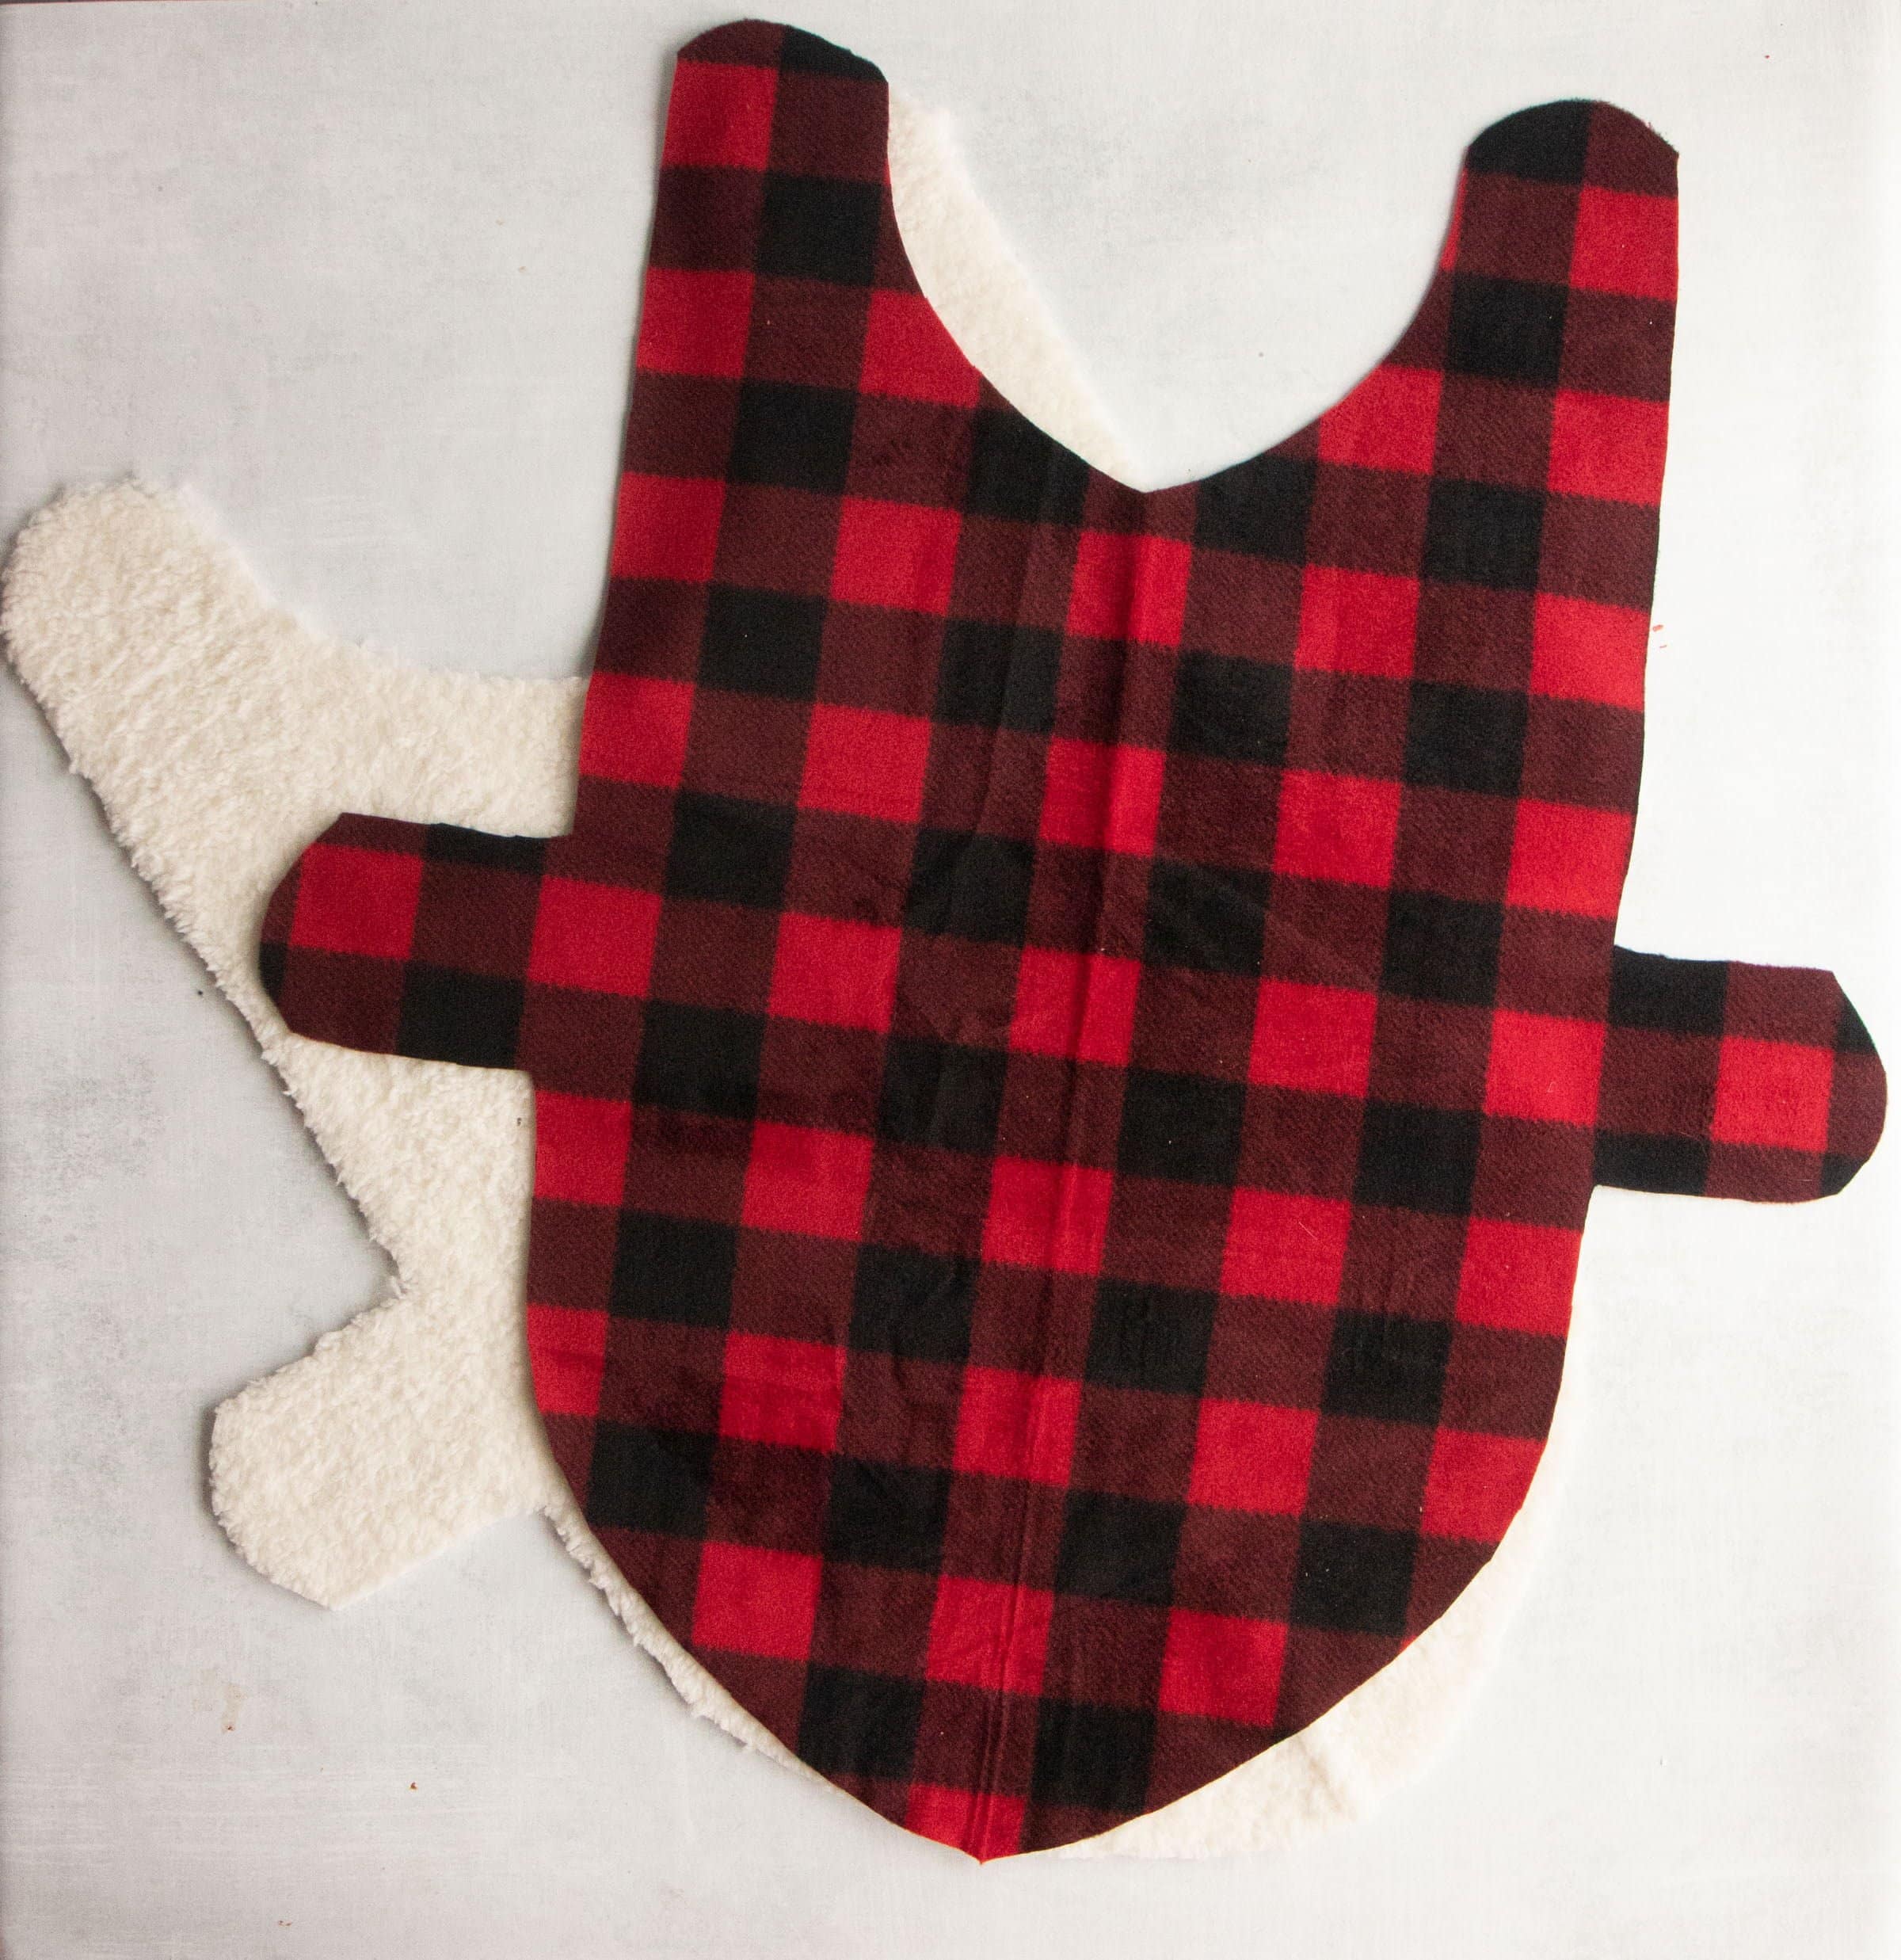 Fleece and faux fur fabric cut out for a dog coat